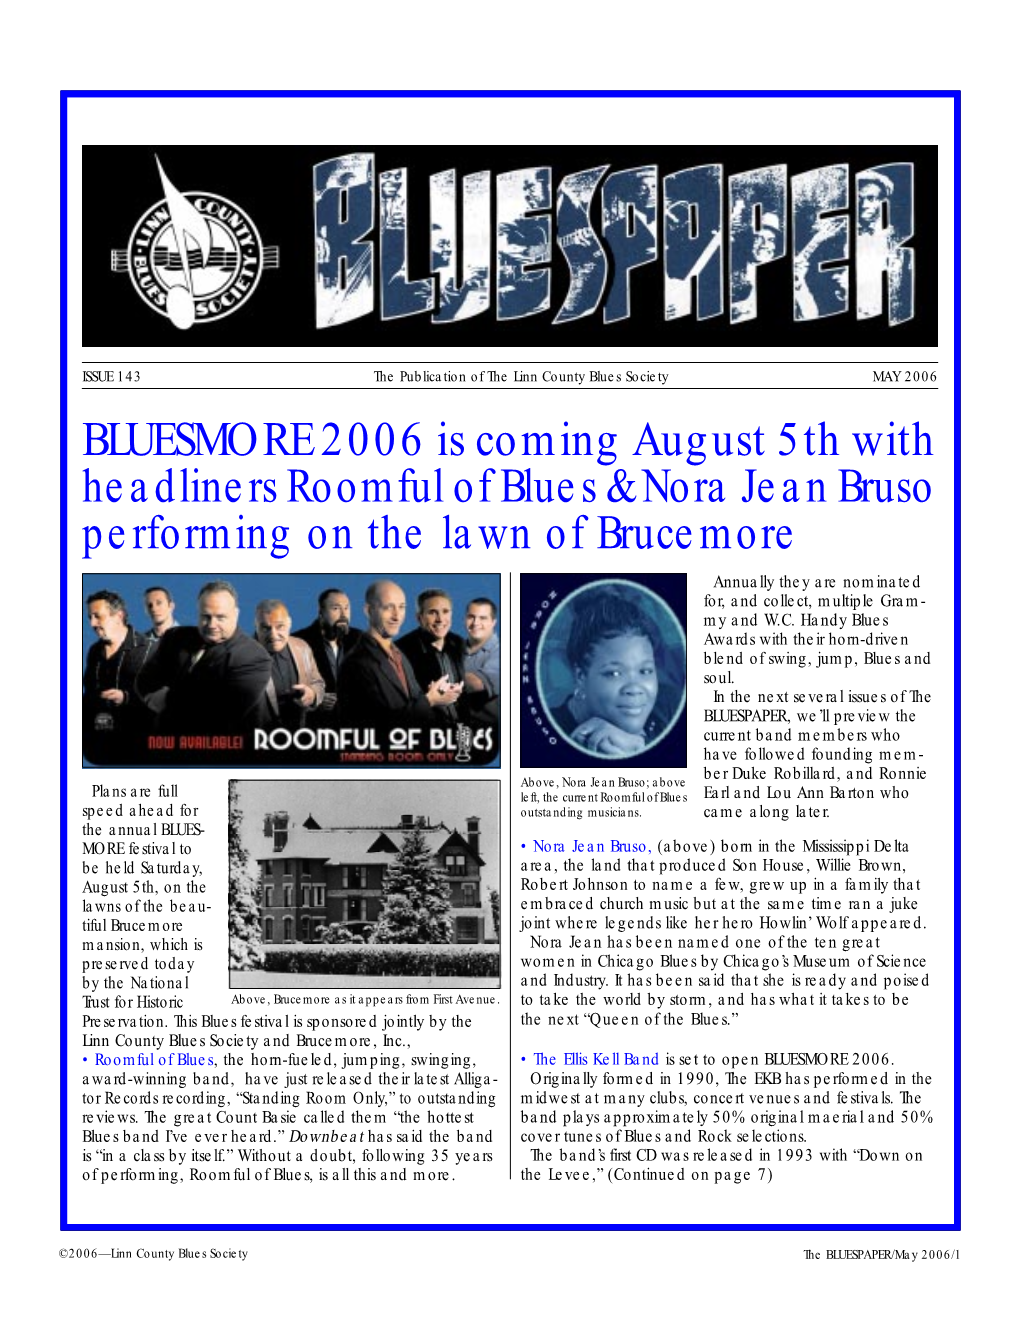 BLUESMORE 2006 Is Coming August 5Th with Headliners Roomful Of